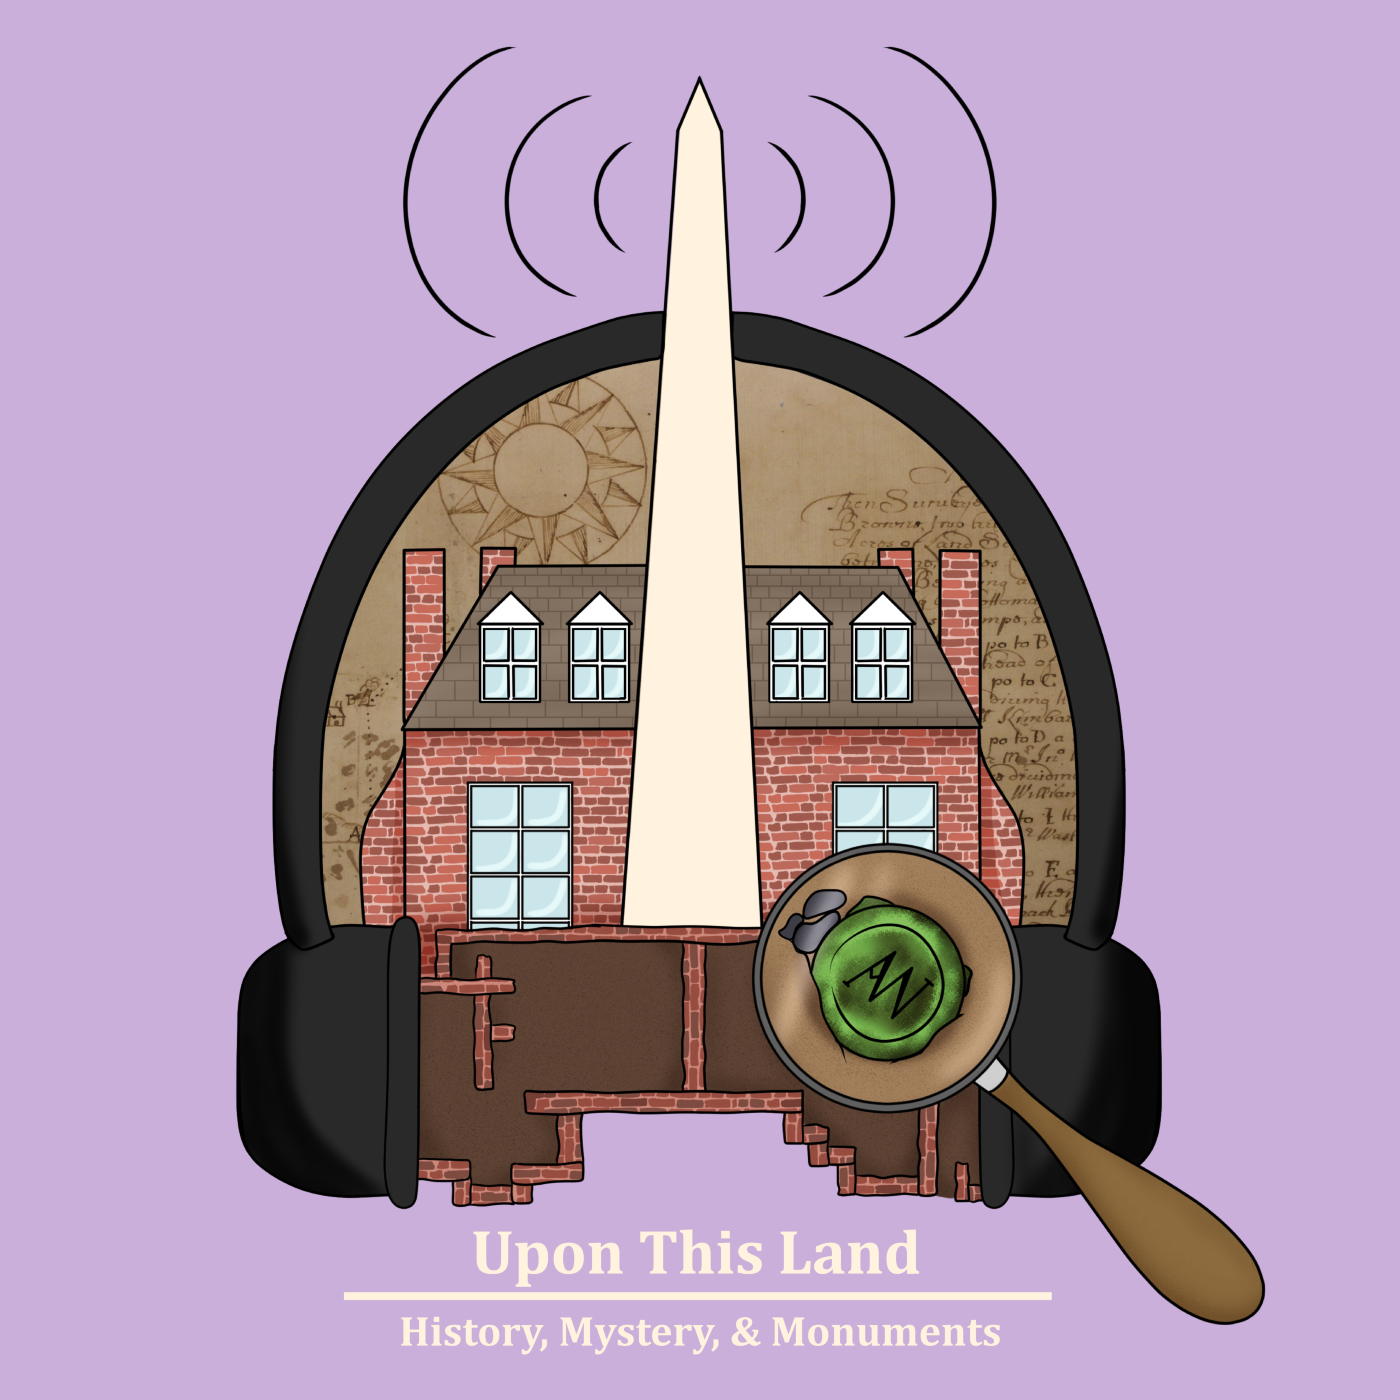 Graphic containing headphones, house, monument, magnify glass, and brick foundation